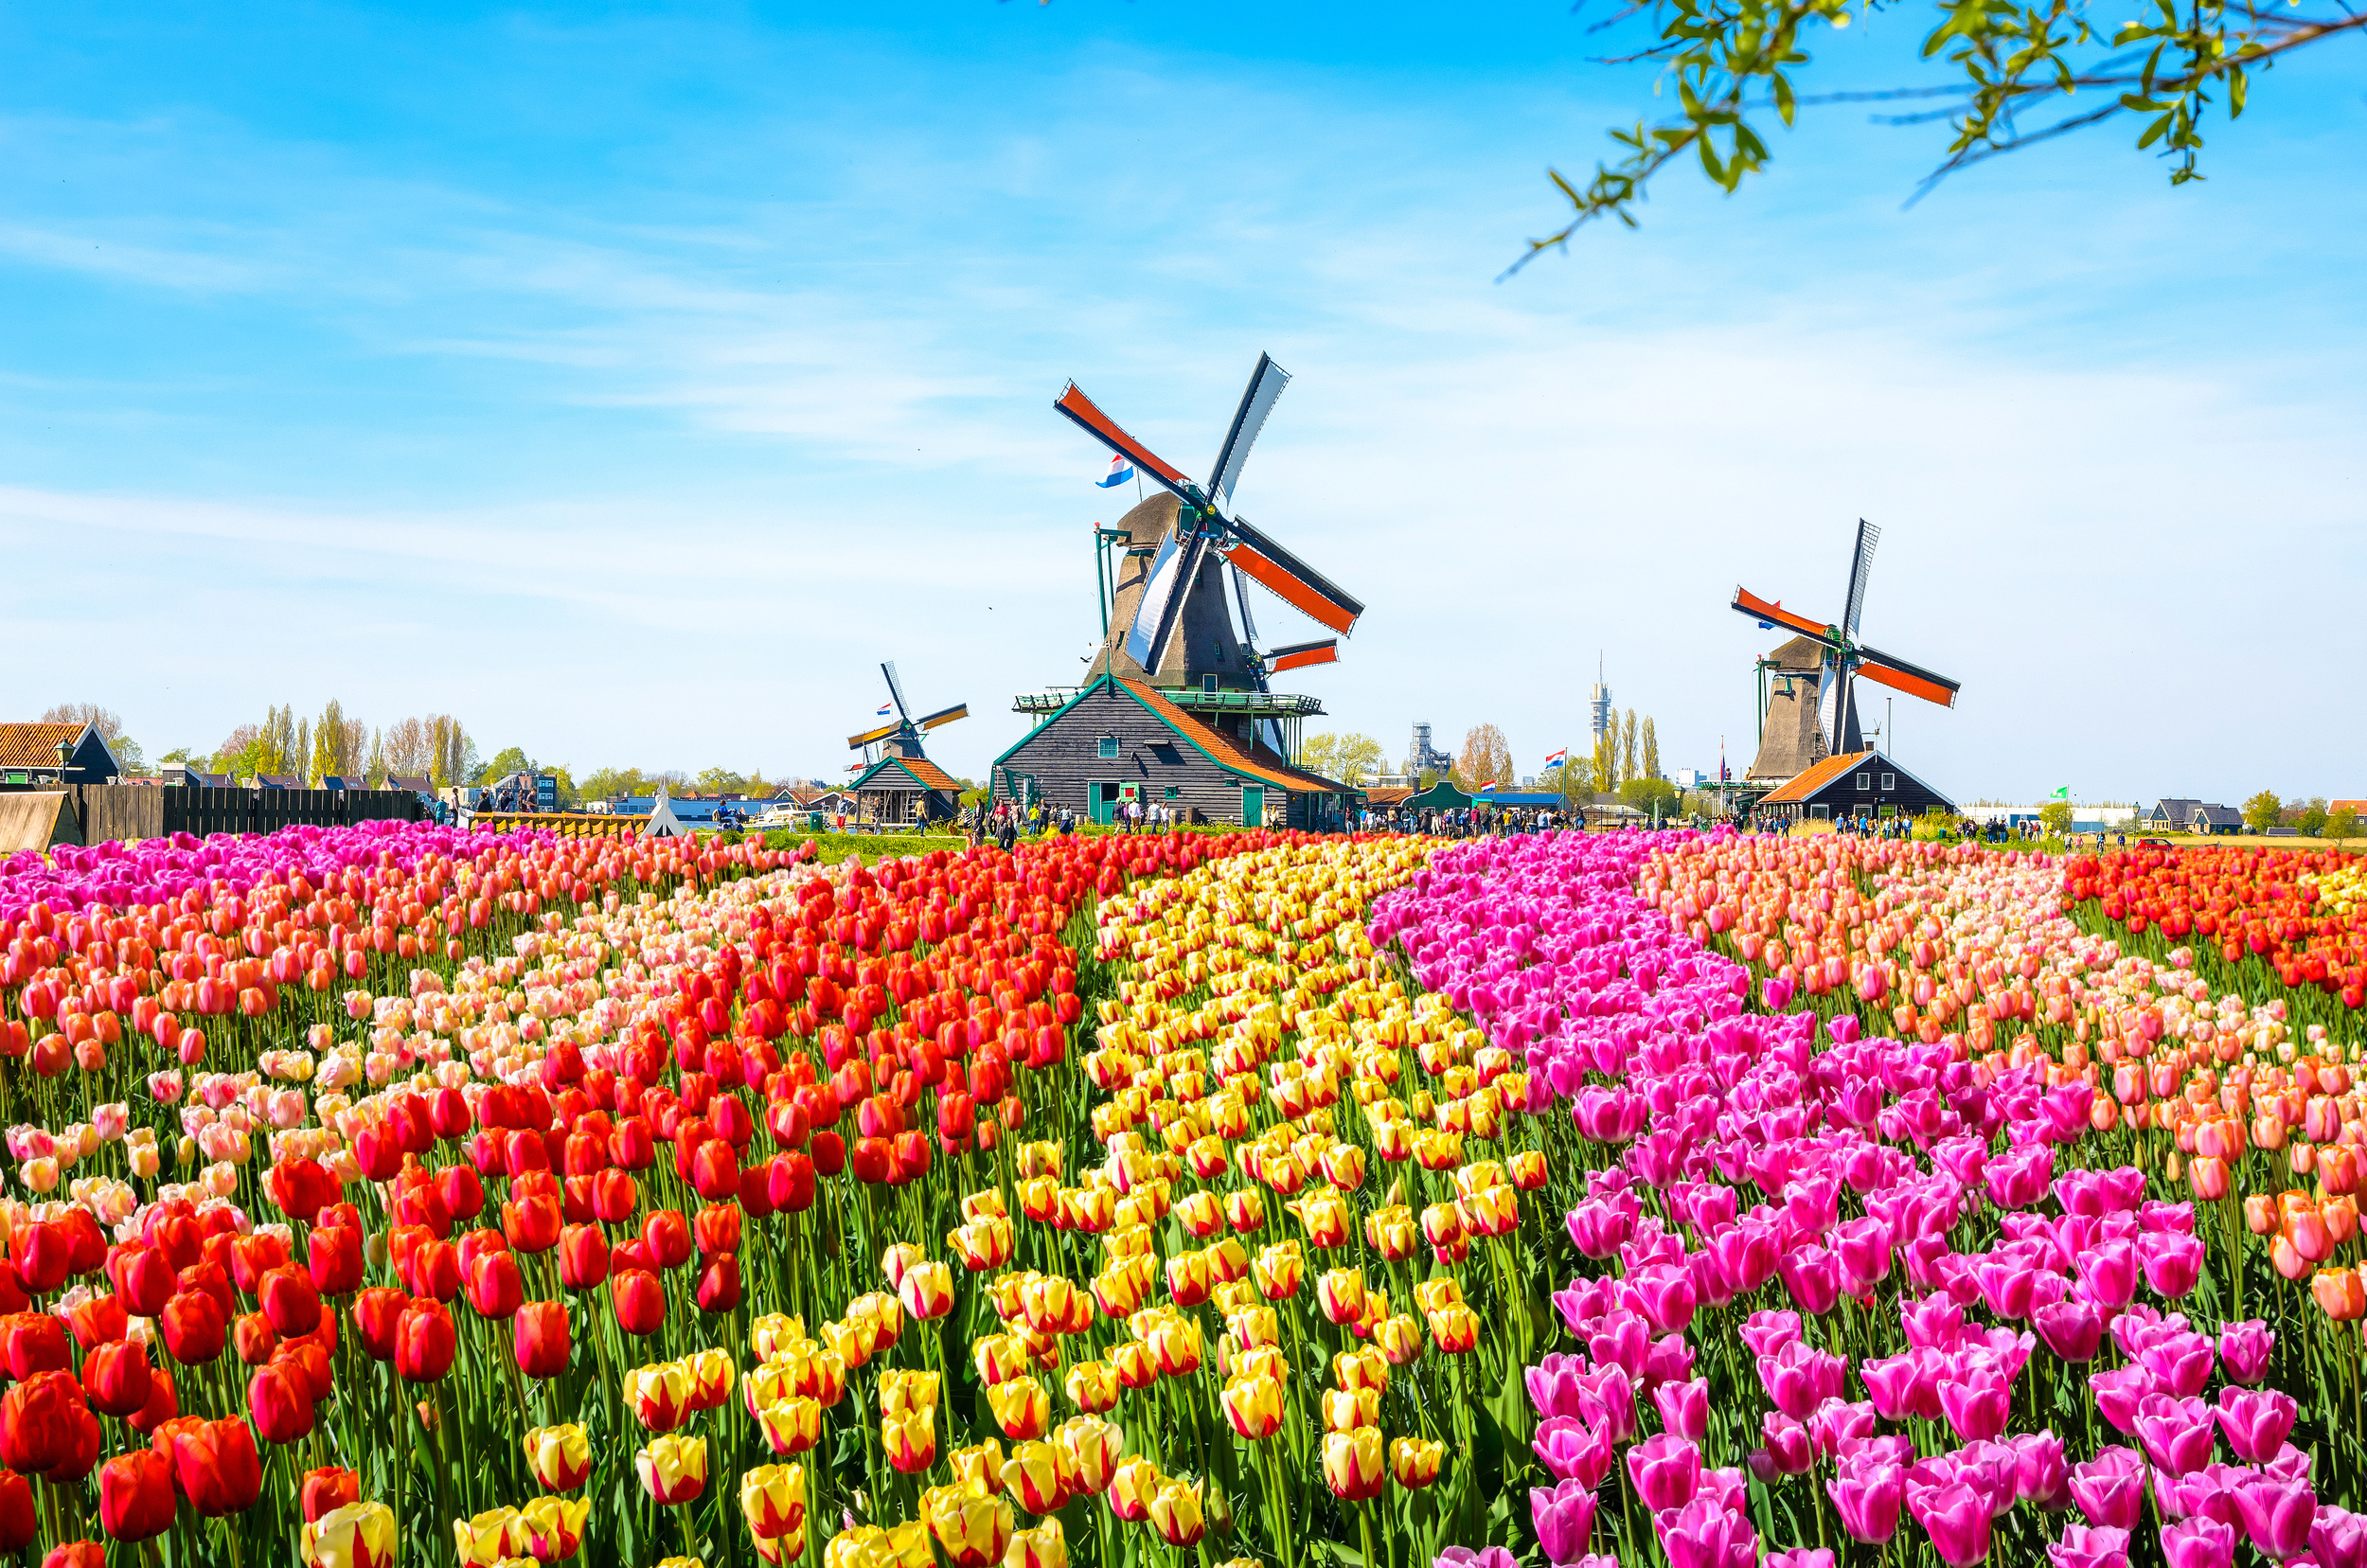 <p>Amsterdam is famous for nightlife and culture, but don’t forget how the rest of the country comes alive in the spring. There are numerous colorful fields, just a train and bike ride away from the capital. Remember to go in the morning before the lines pile up!</p><p>You may also like: <a href='https://www.yardbarker.com/lifestyle/articles/21_foods_that_surprisingly_taste_better_frozen_021124/s1__37739637'>21 foods that surprisingly taste better frozen</a></p>